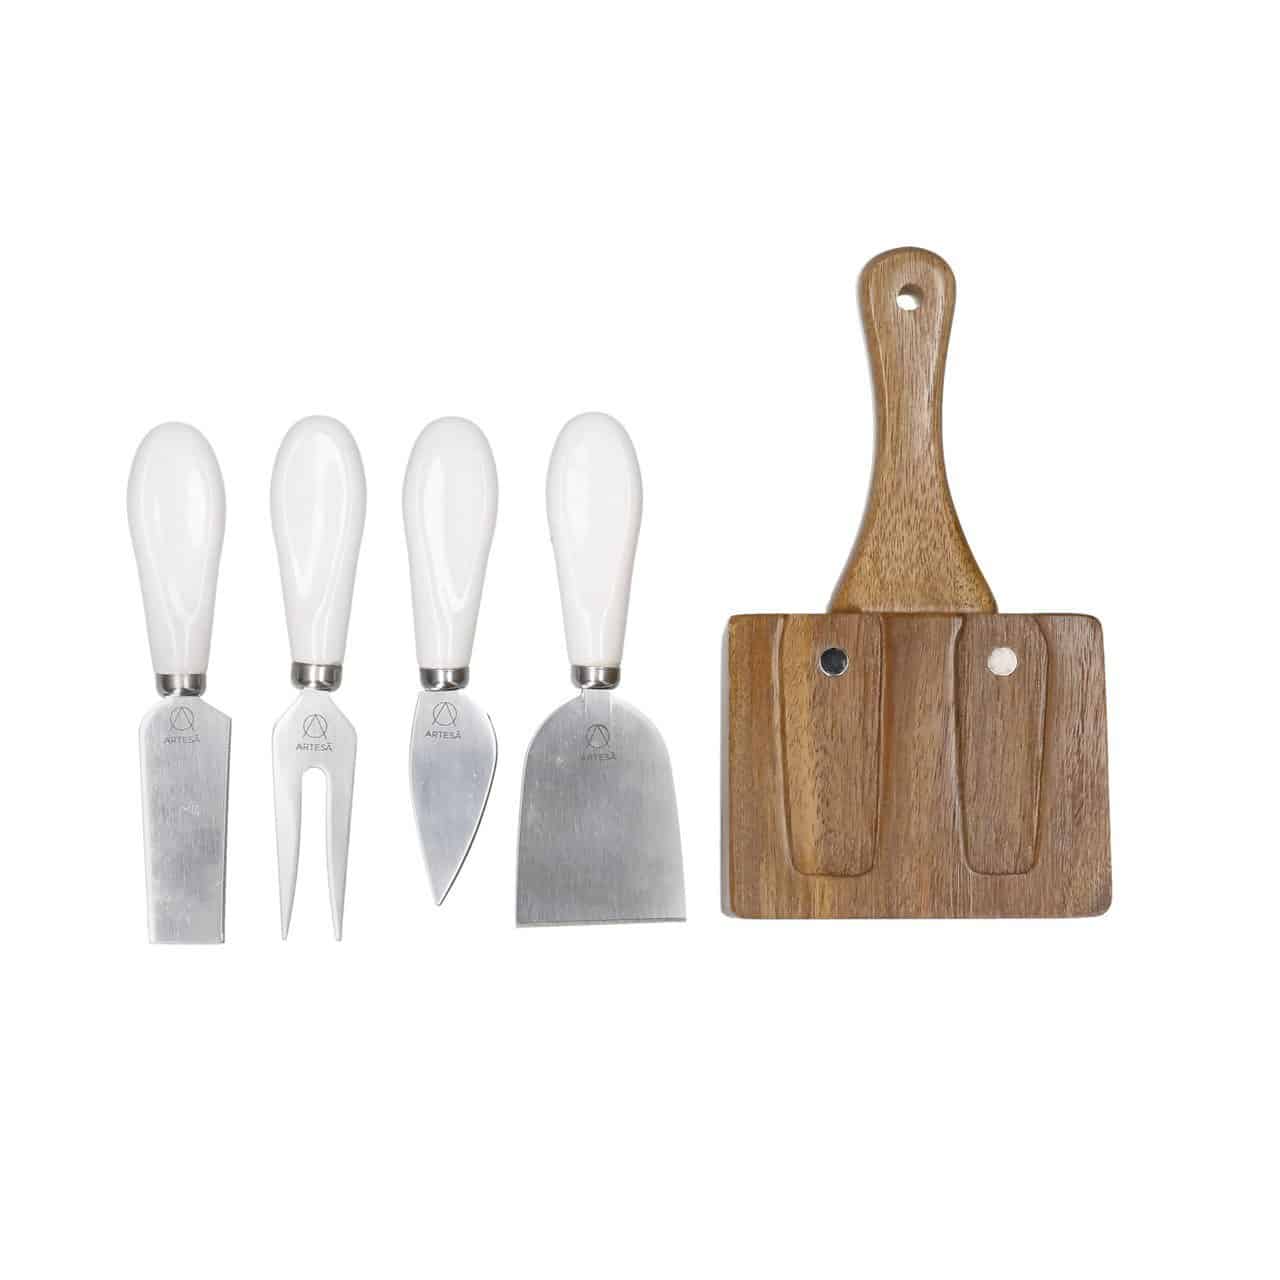 Artesà_Appetiter_Cheese_Knife_Set_with_Block